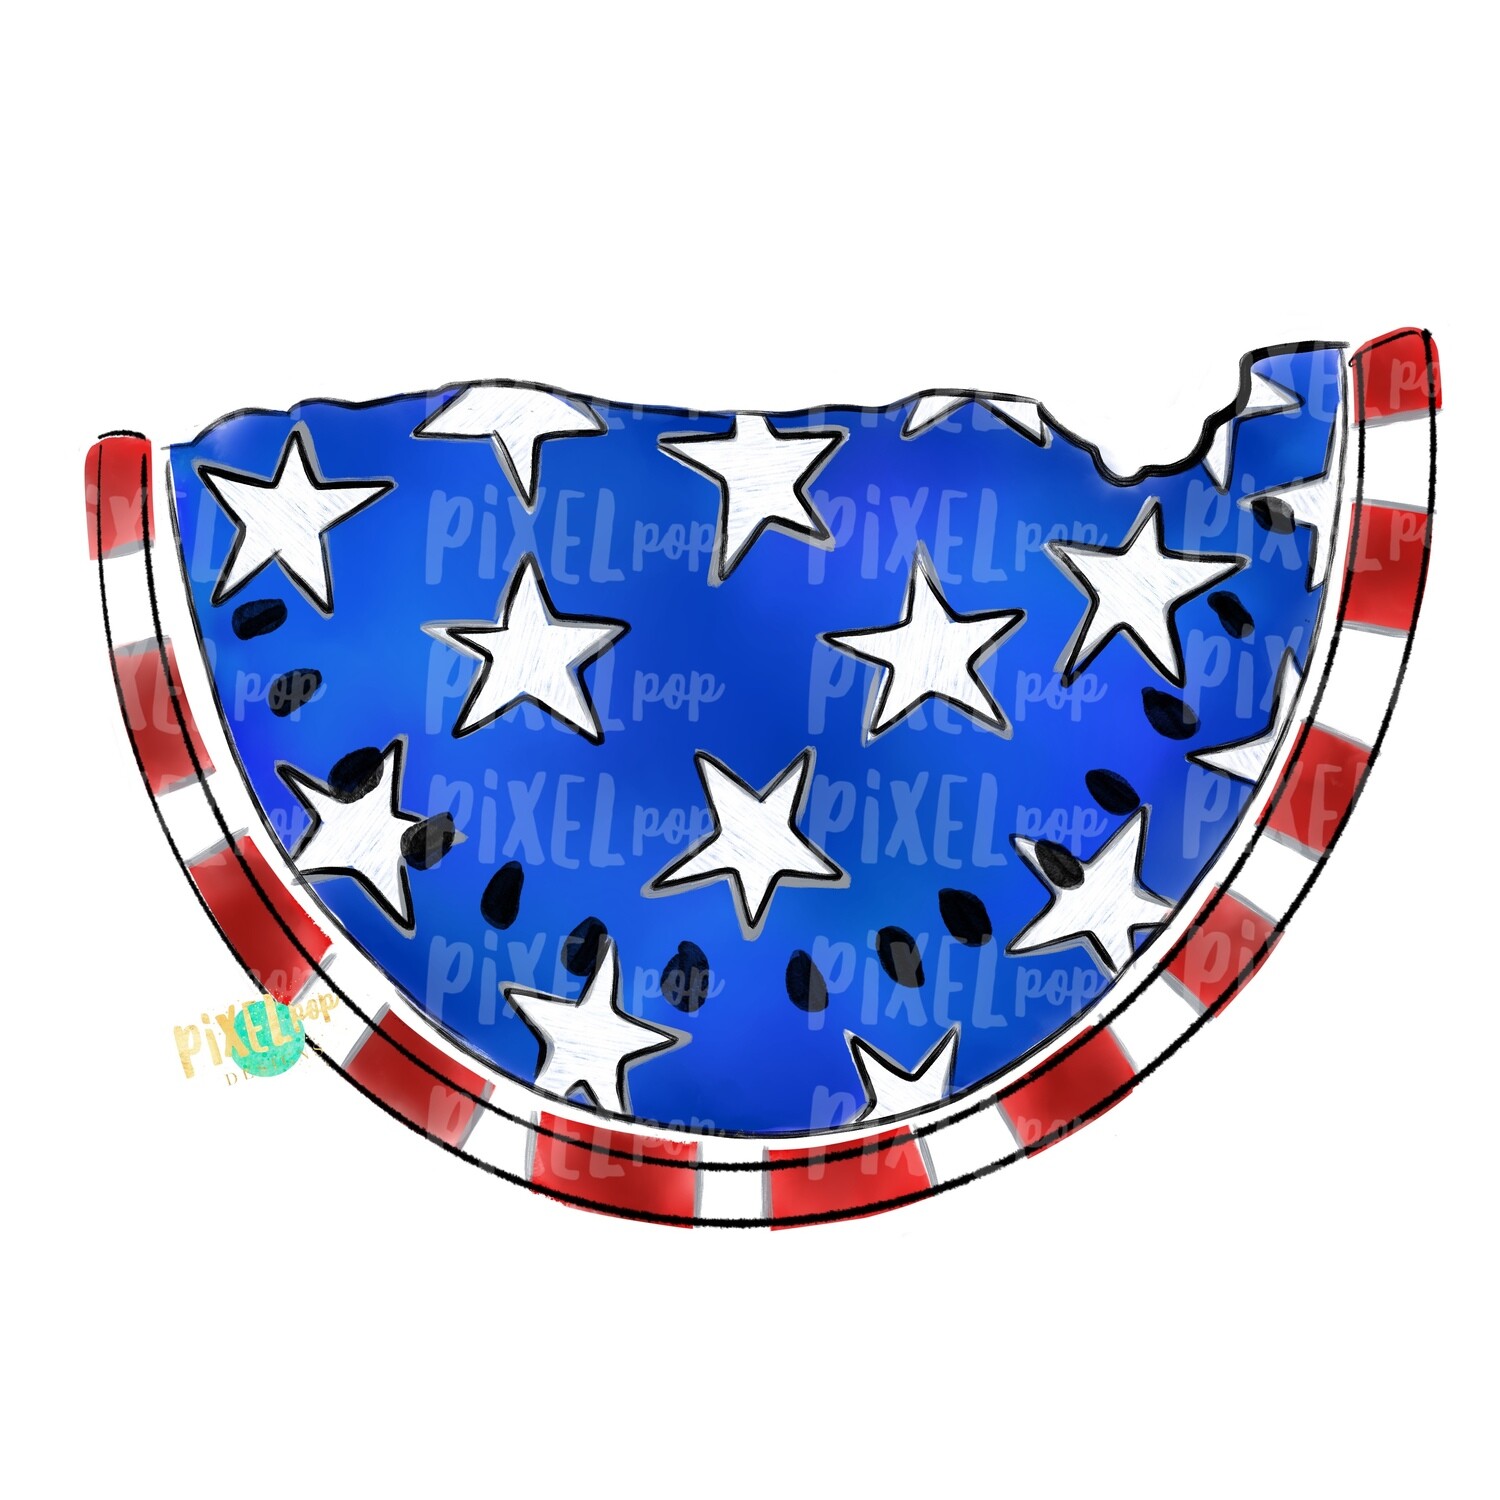 PNG file for Sublimation July 4th Junkie PNG July Digital Design 4th of July Clipart Fourth of July Junkie File for Sublimation